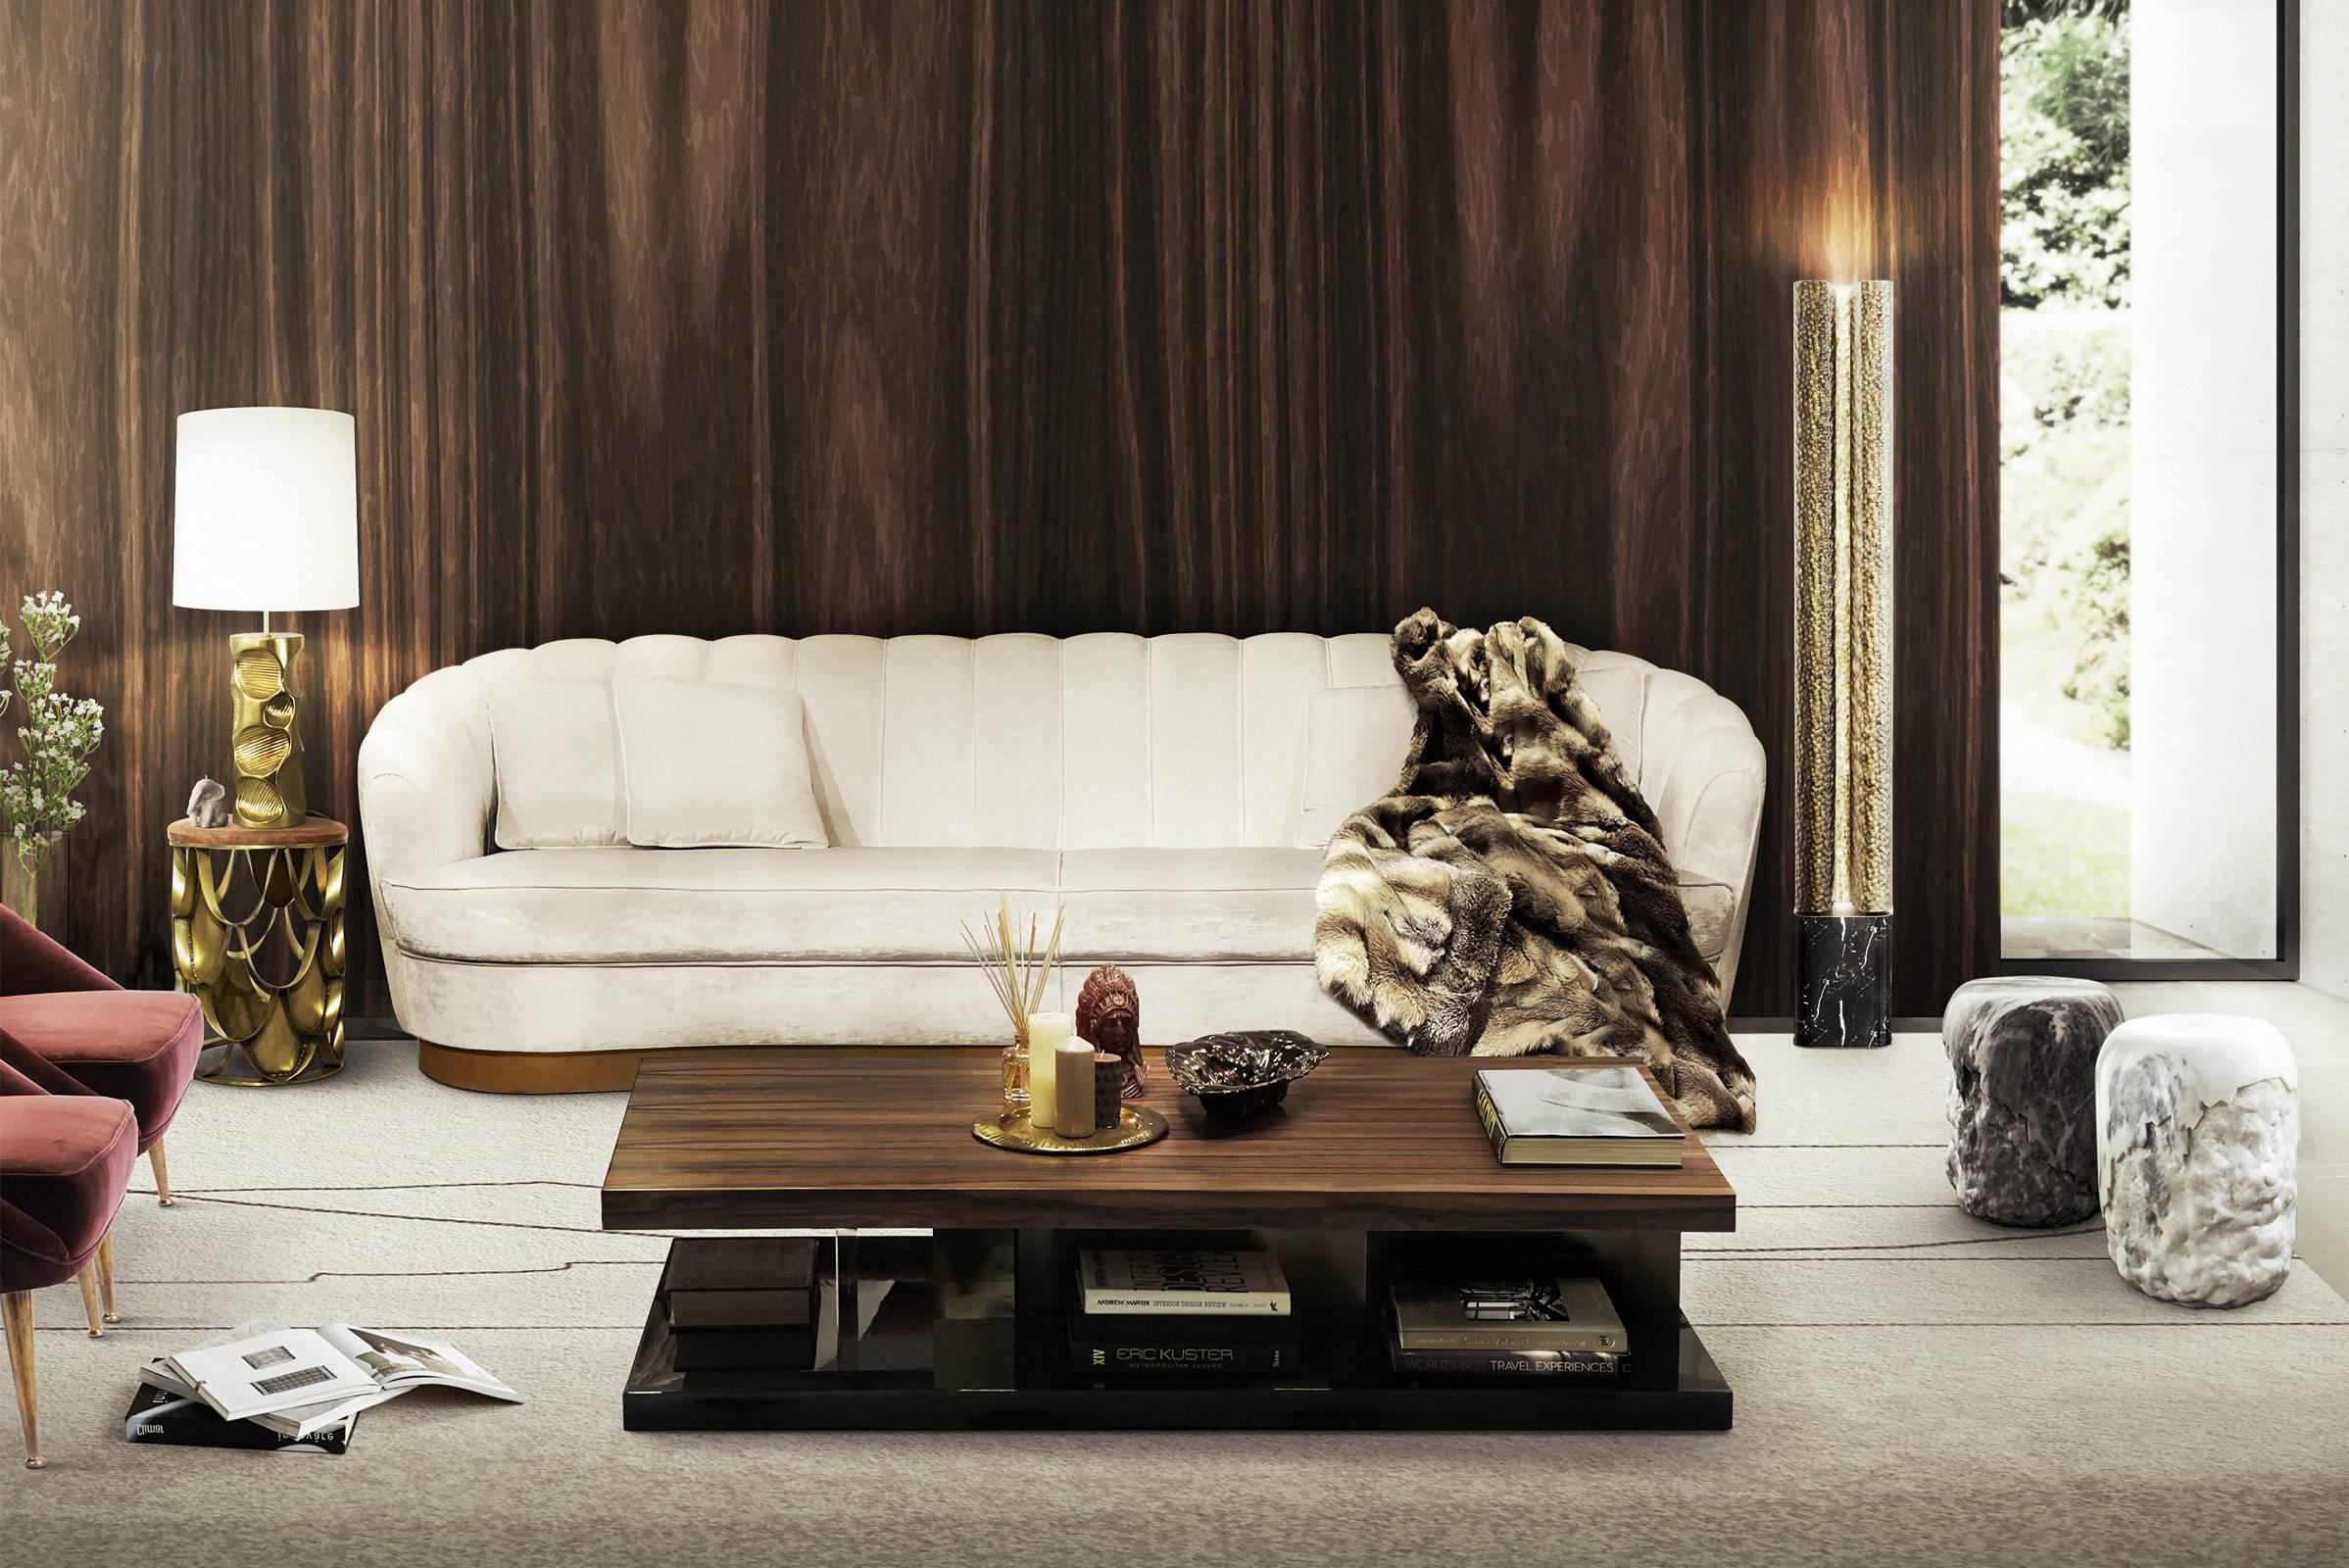 Polished Chloe Coffee Table with High Glossy Lacquer, Veneer Wood and Brass For Sale